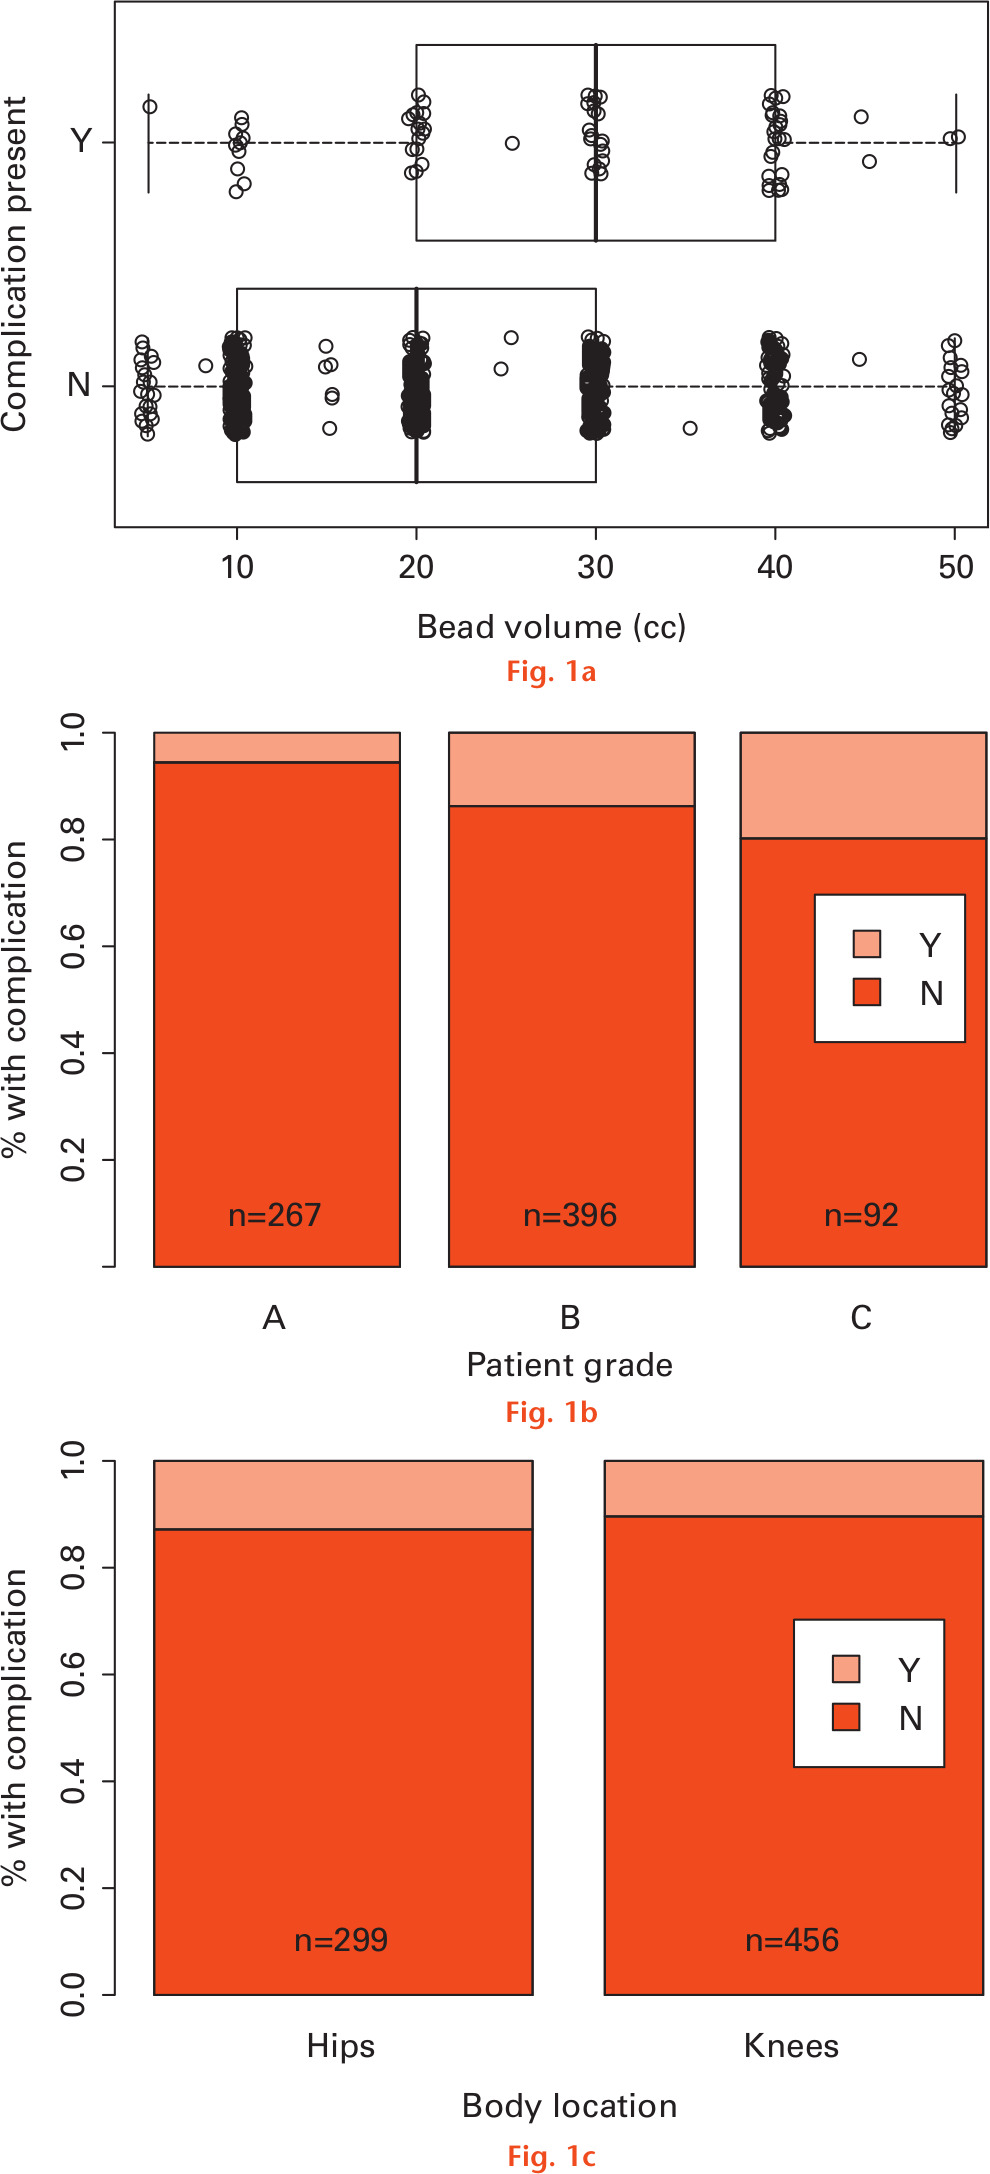  
            Graphs showing a) how bead volume changes for different combinations of complication (ComPresent); b) how the percentage with complications changes with patient grade; and c) how percentage with complications changes with body location. In graphs b) and c), total sample sizes are indicated at the bottom of the bars.
          